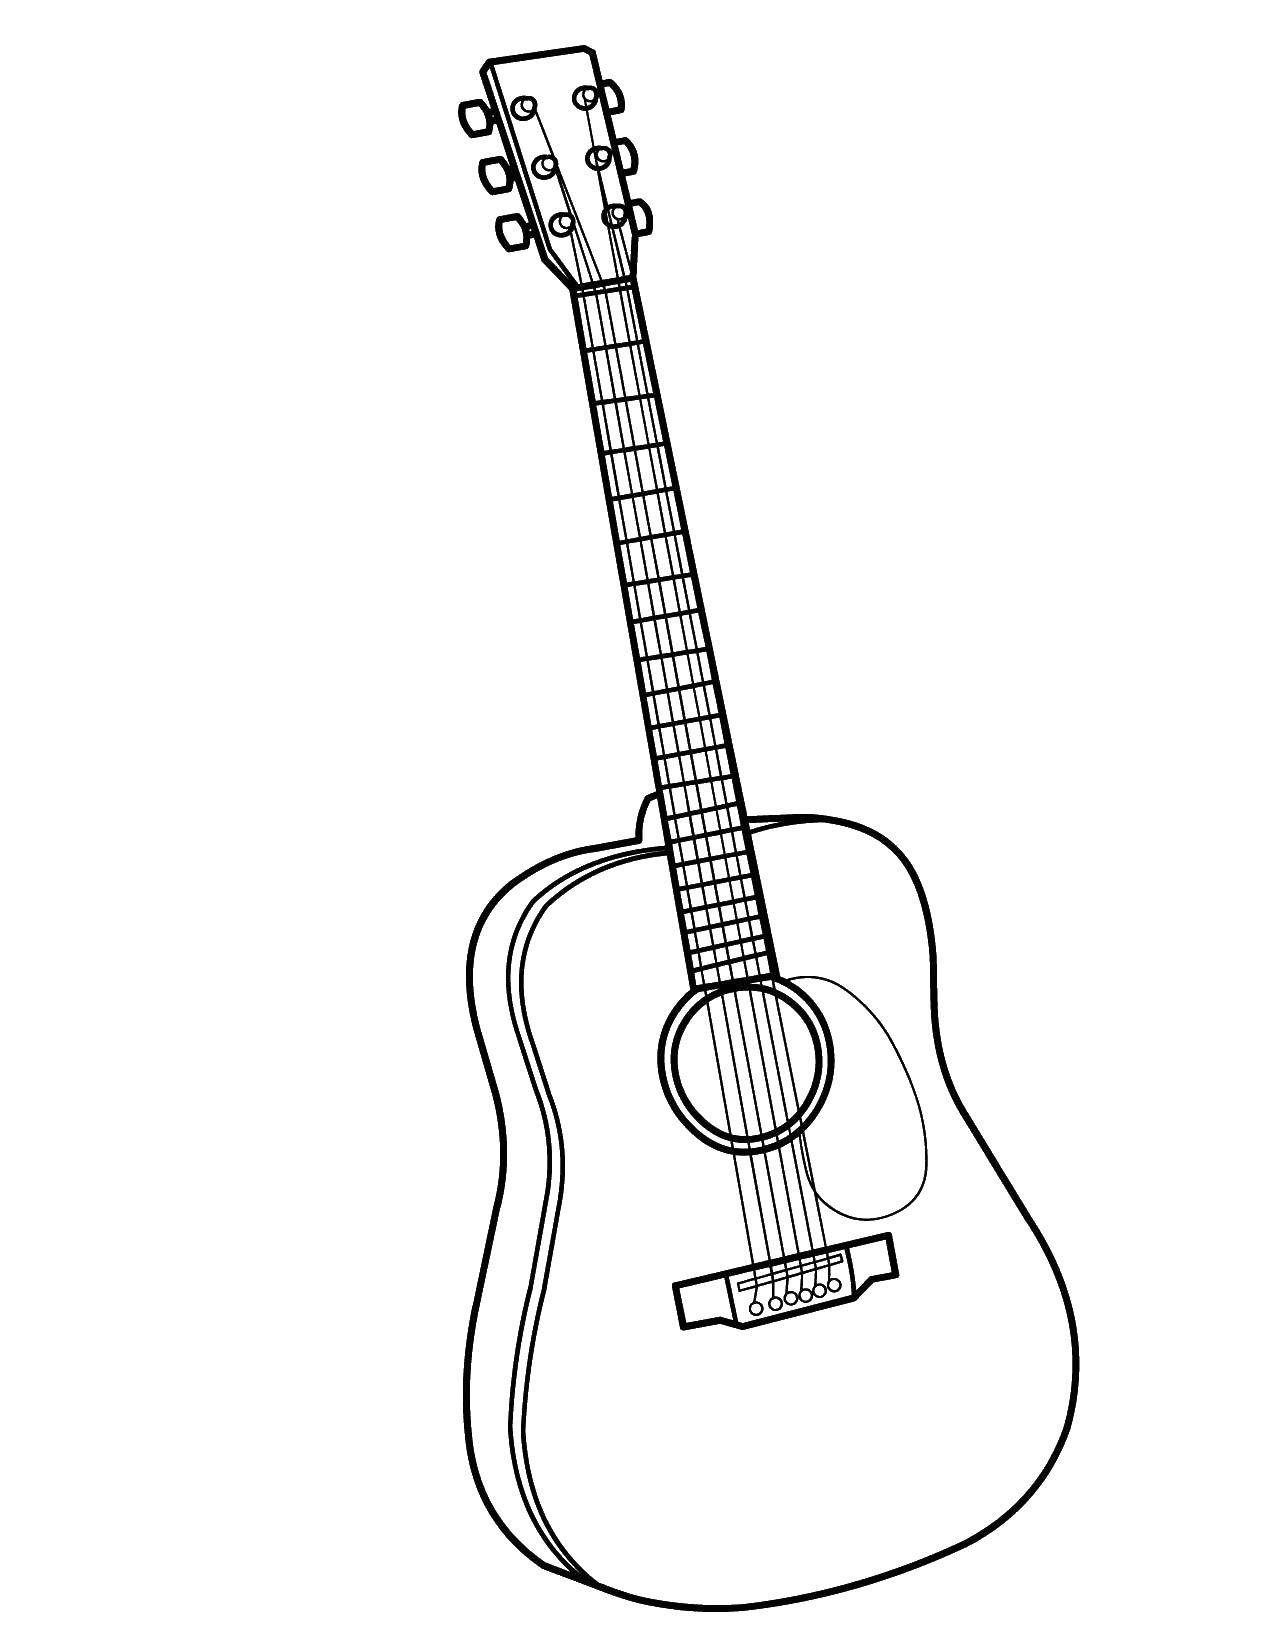 Coloring Guitar musical instrument. Category Musical instrument. Tags:  Musical instruments, guitar.